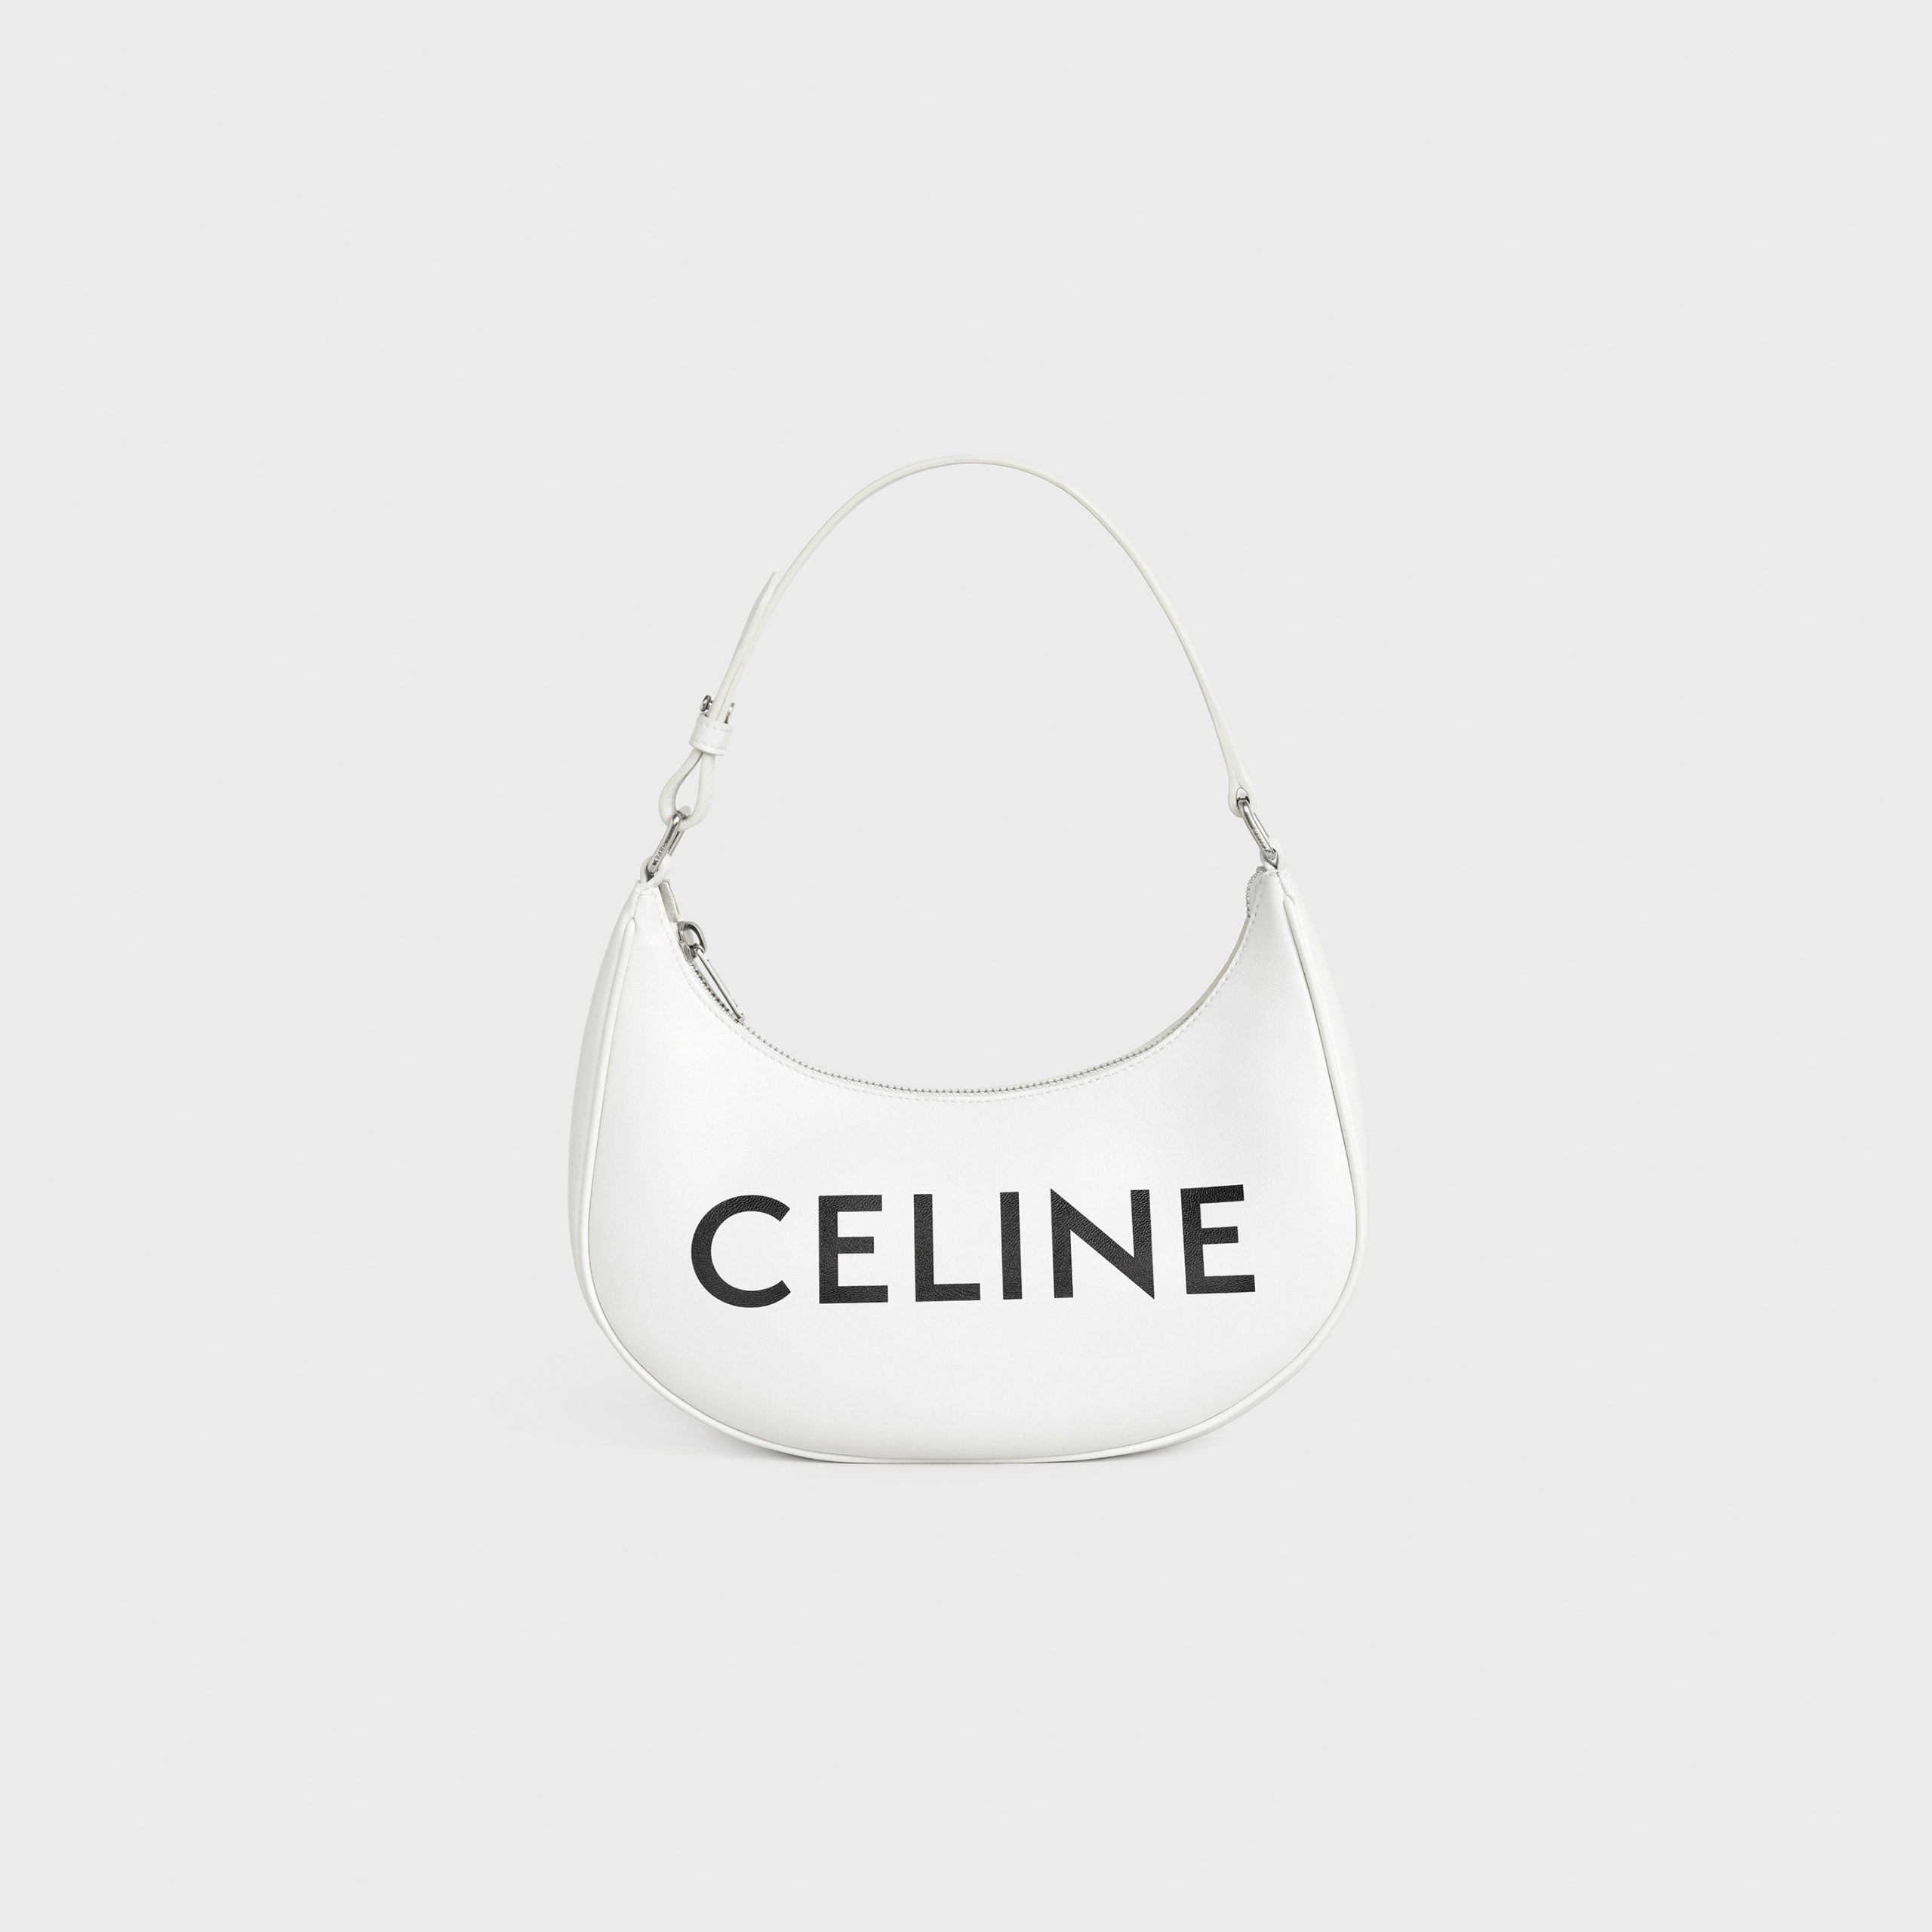 Celine Ava Bag In Smooth Calfskin With Celine Print – White – 193953DEE.01BC